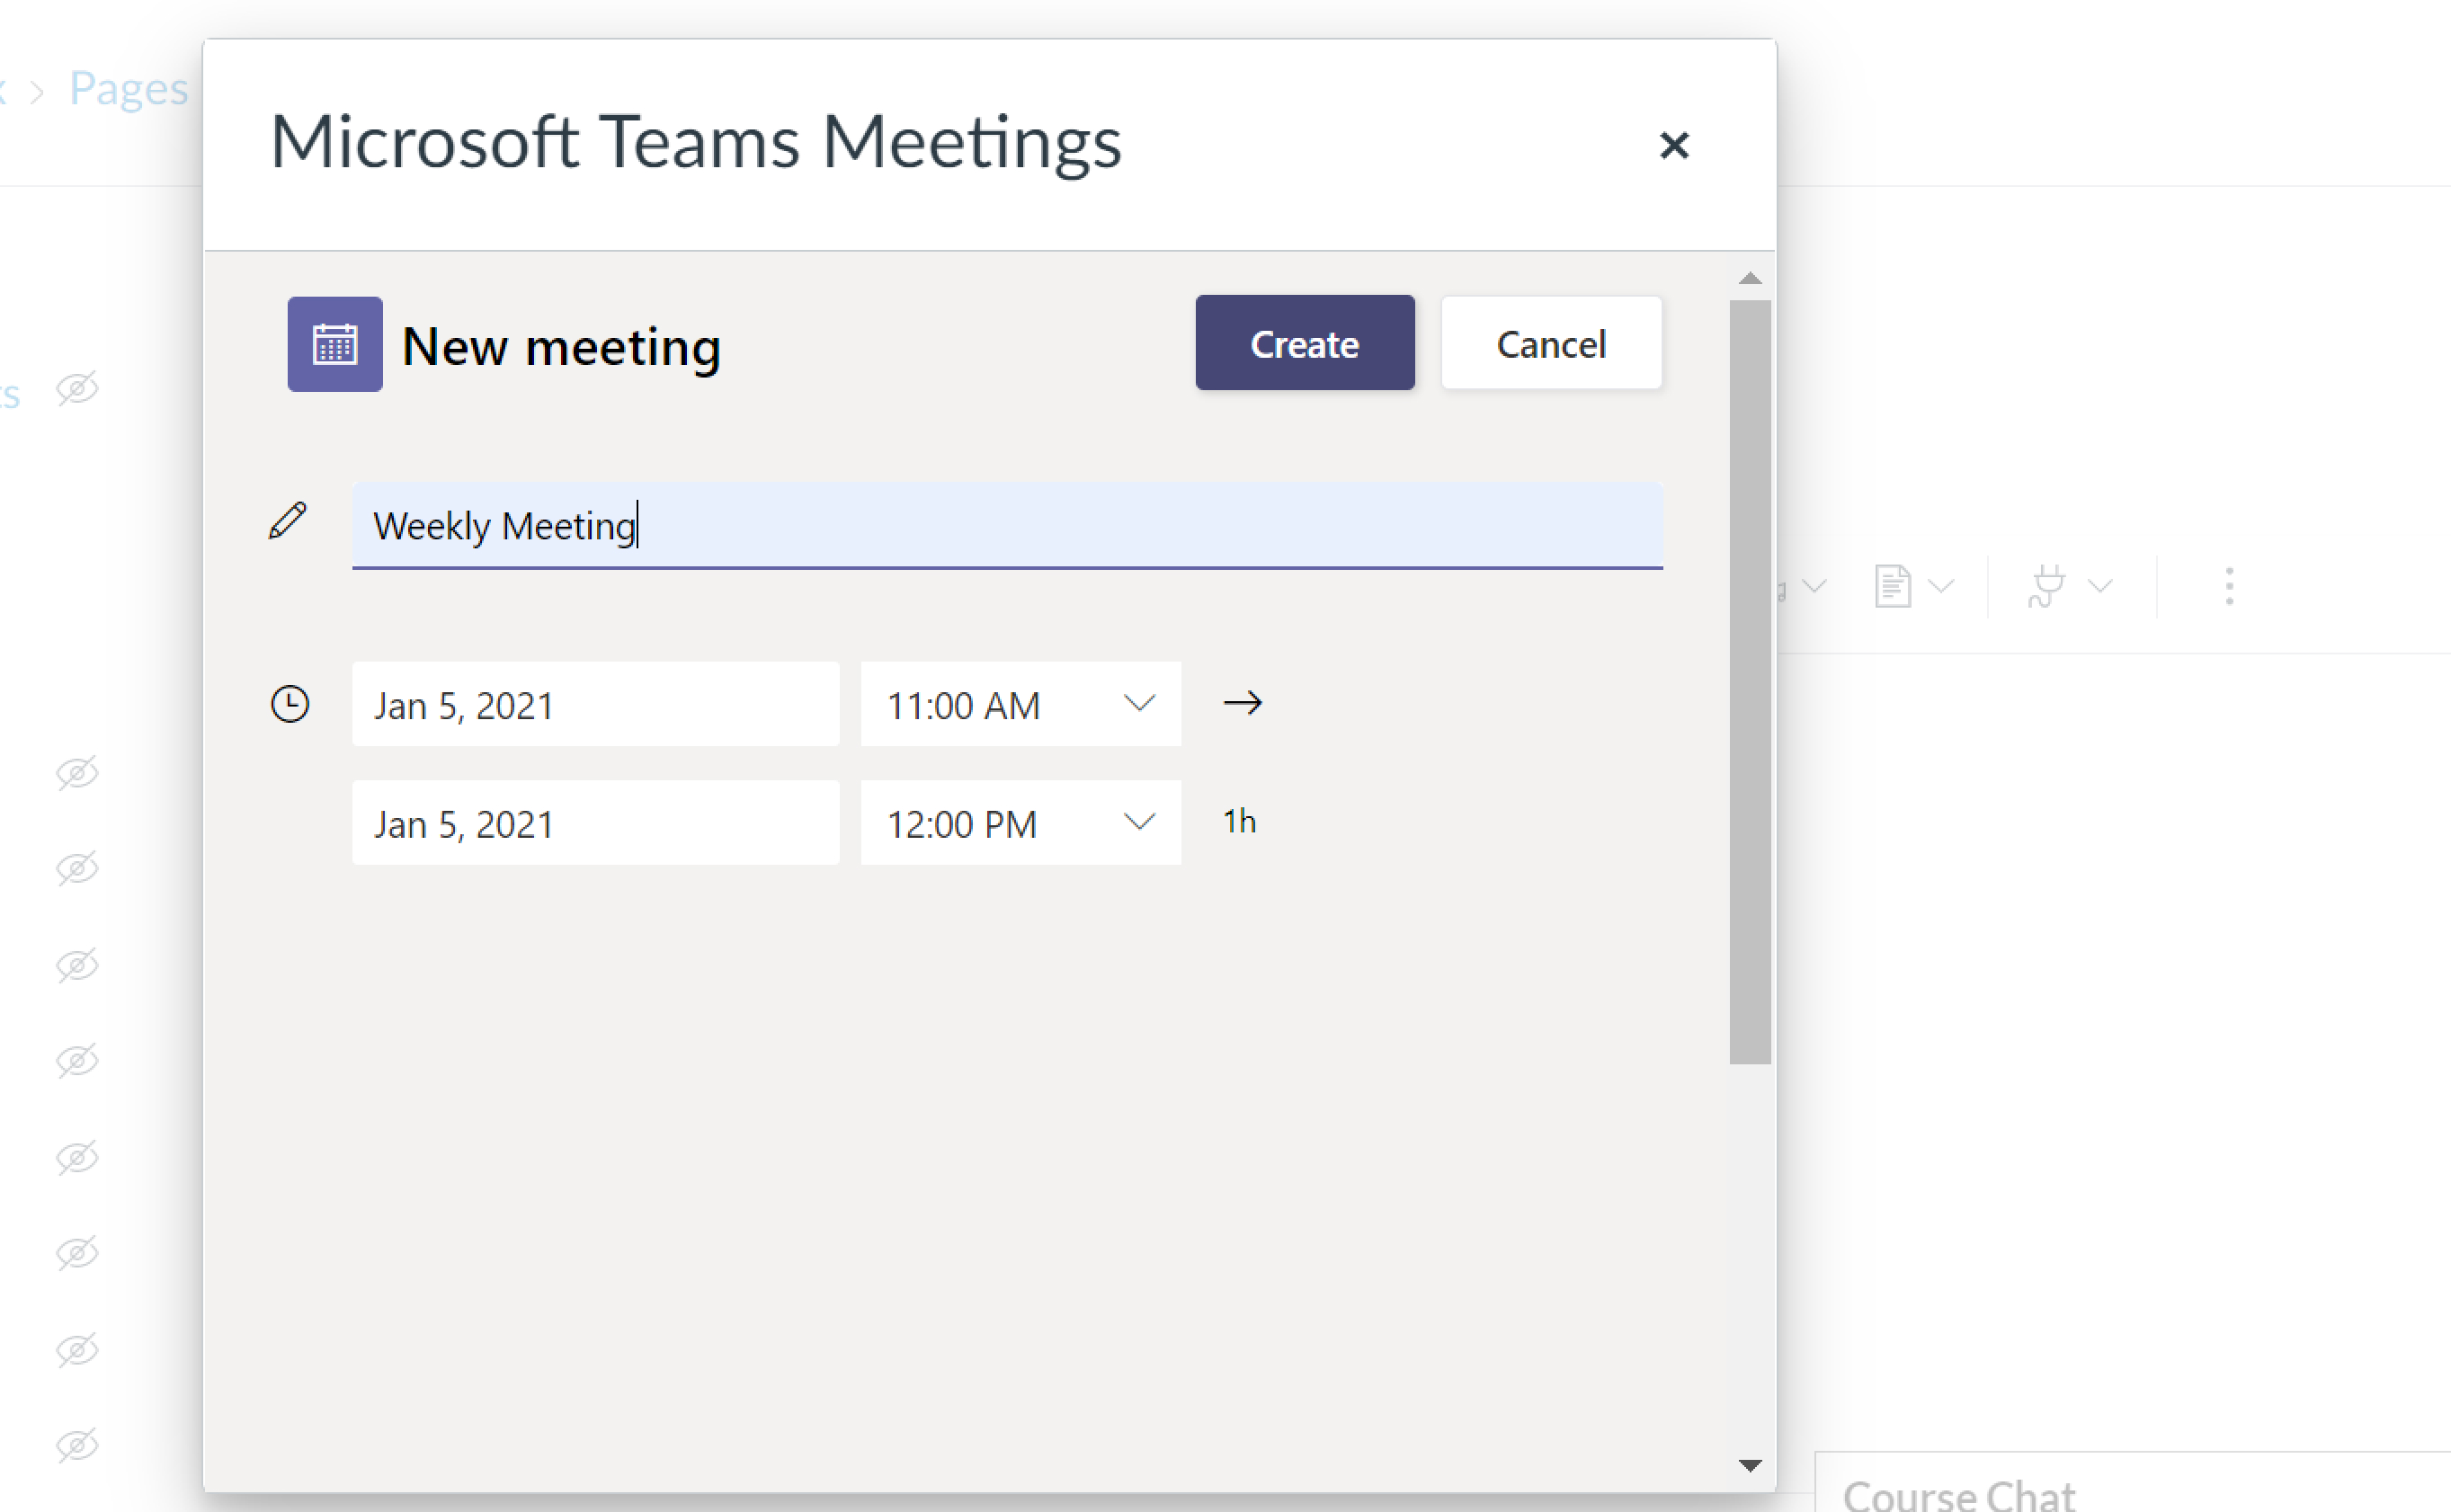 Canvas pop up window with Microsoft Teams new meeting options.